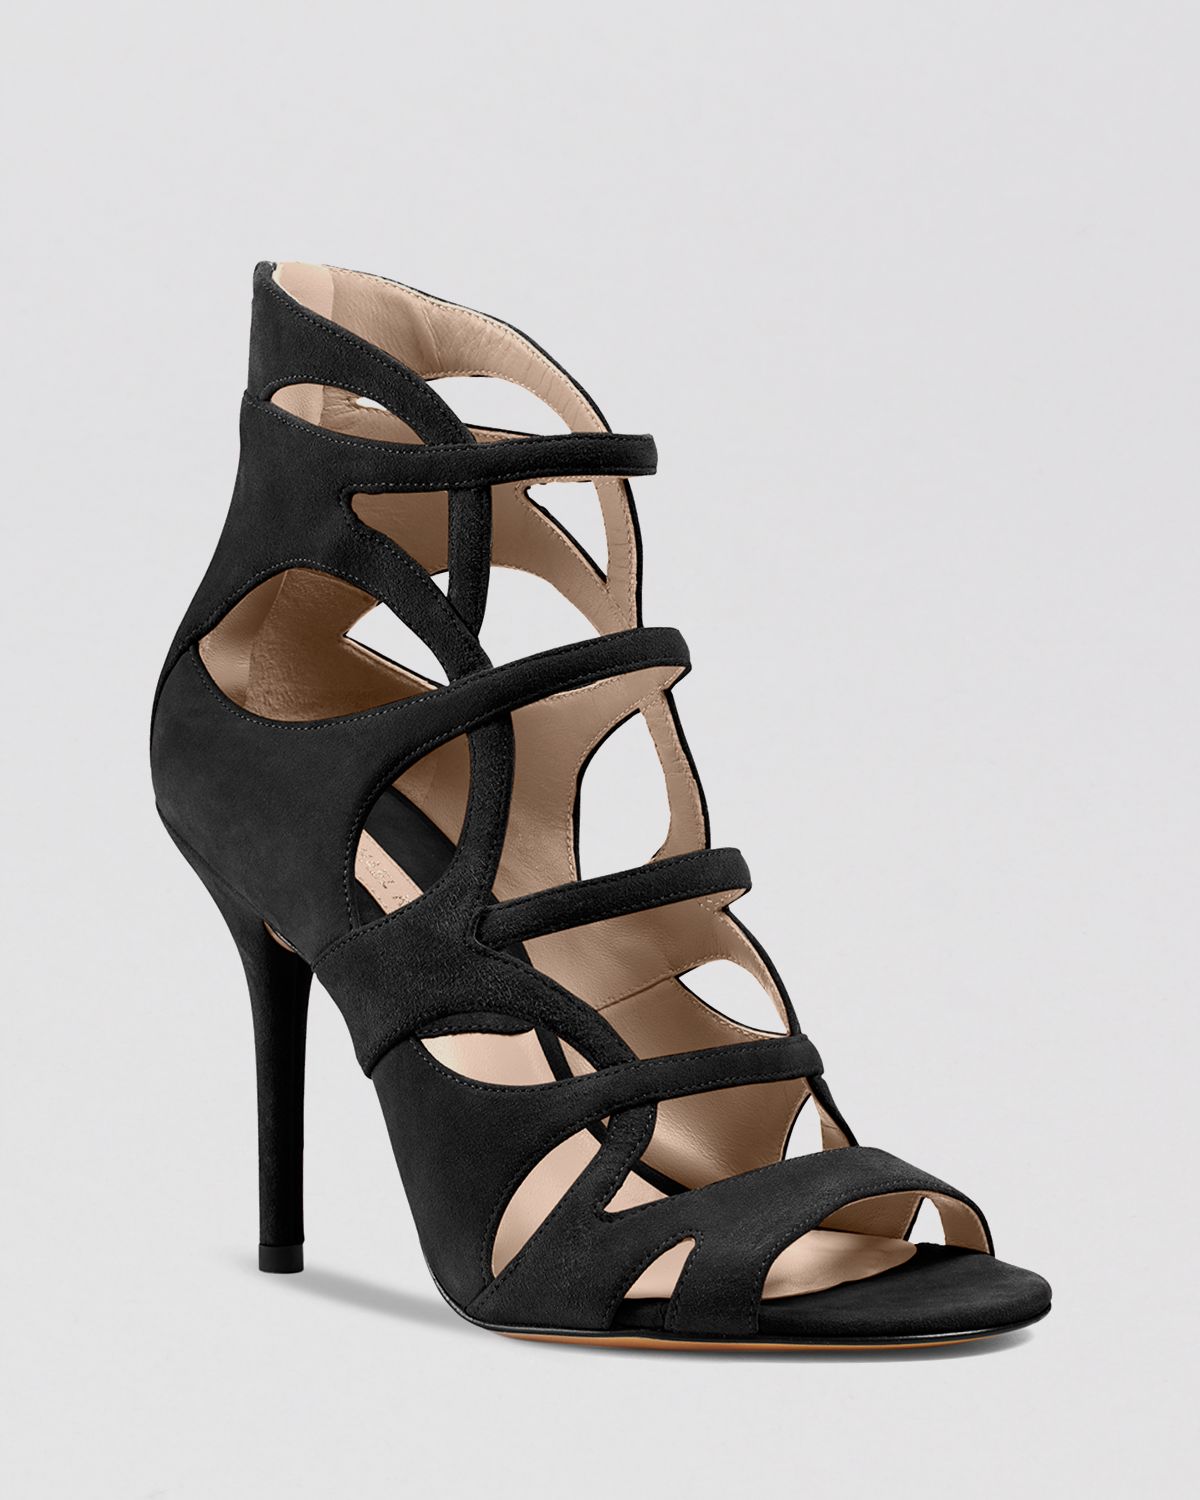 Slip shoes sent line Michael Kors Caged Sandals Casey Strappy High Heel in Black | Lyst